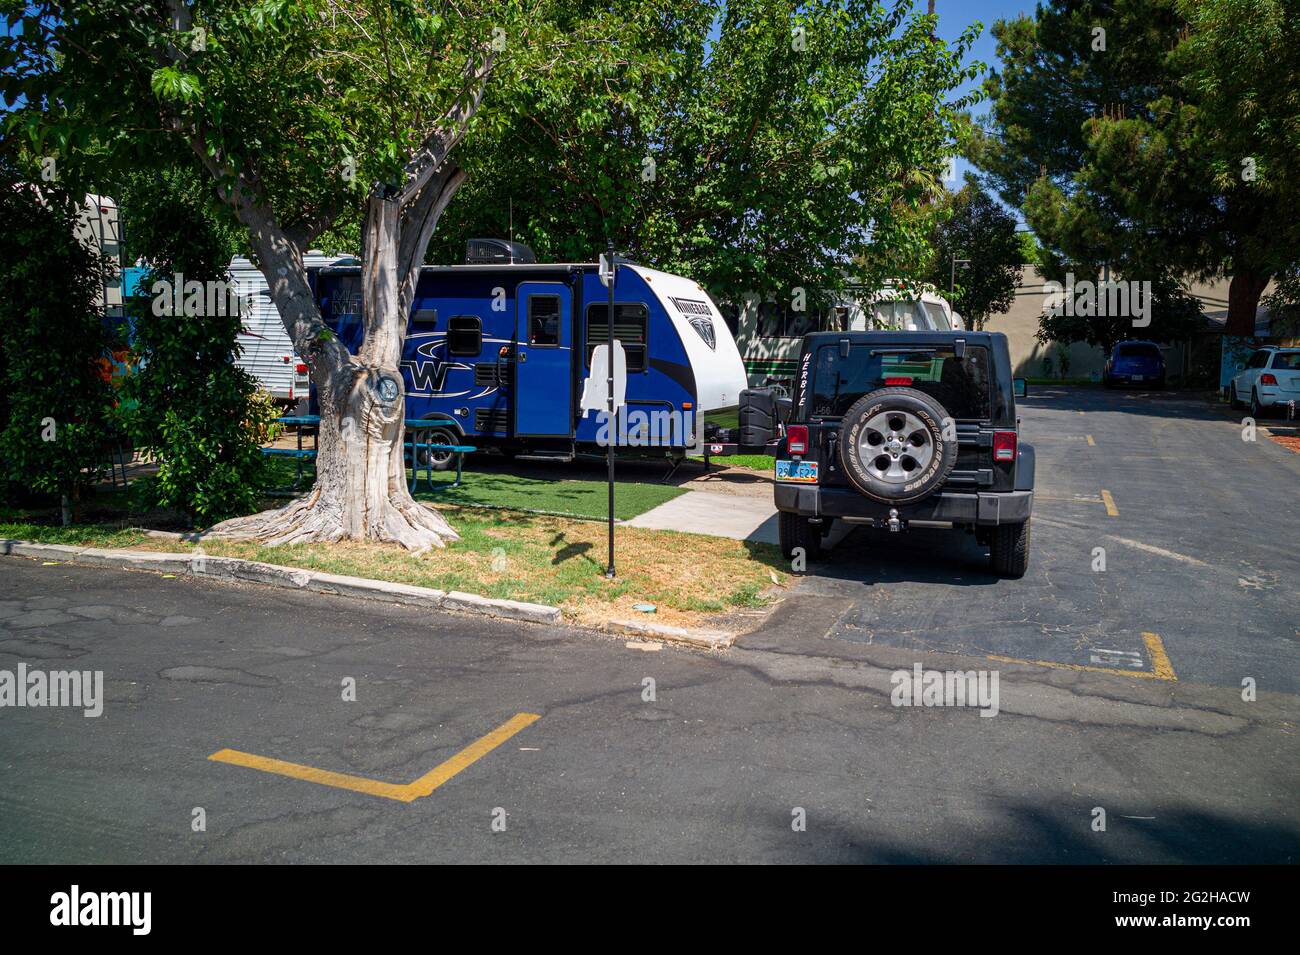 Jeep and Caravan on the Hollywood RV Park in Los Angeles, often known by its initials L.A., is the most populous city in the state of California, USA Stock Photo